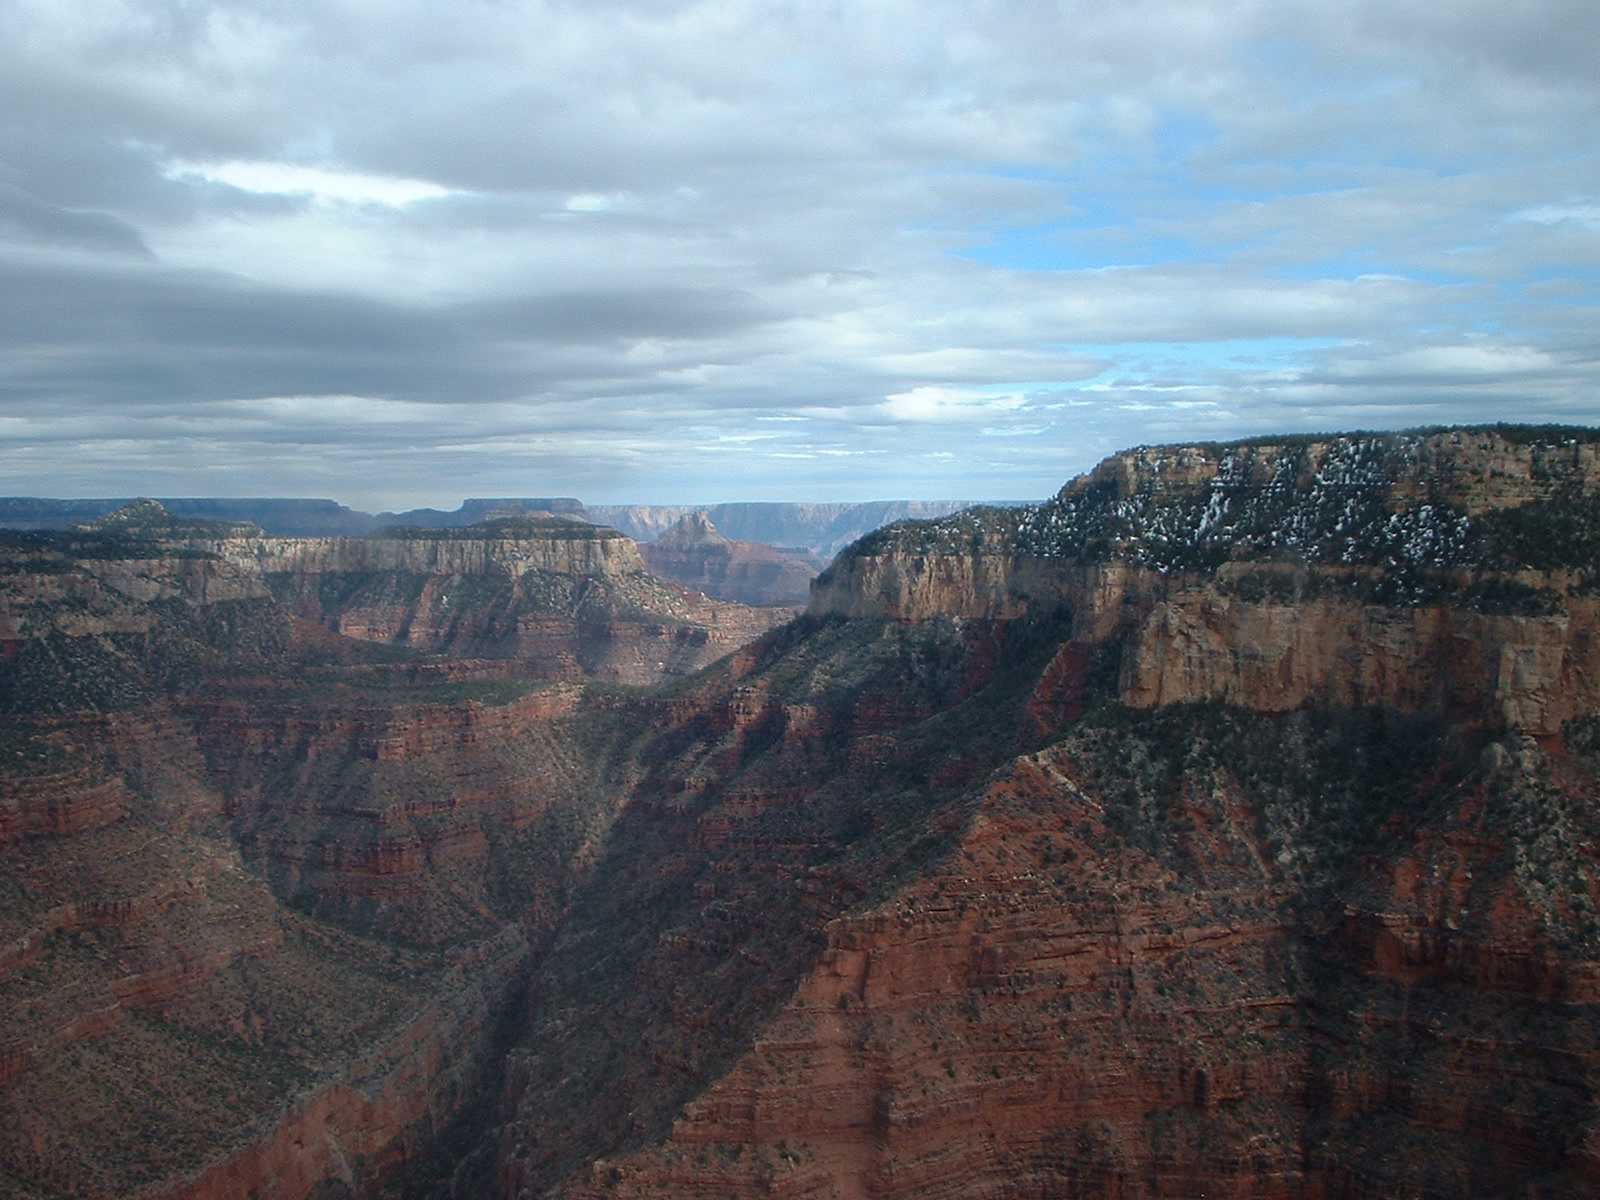 Helicopter over the Grand Canyon - photo by Juliamaud